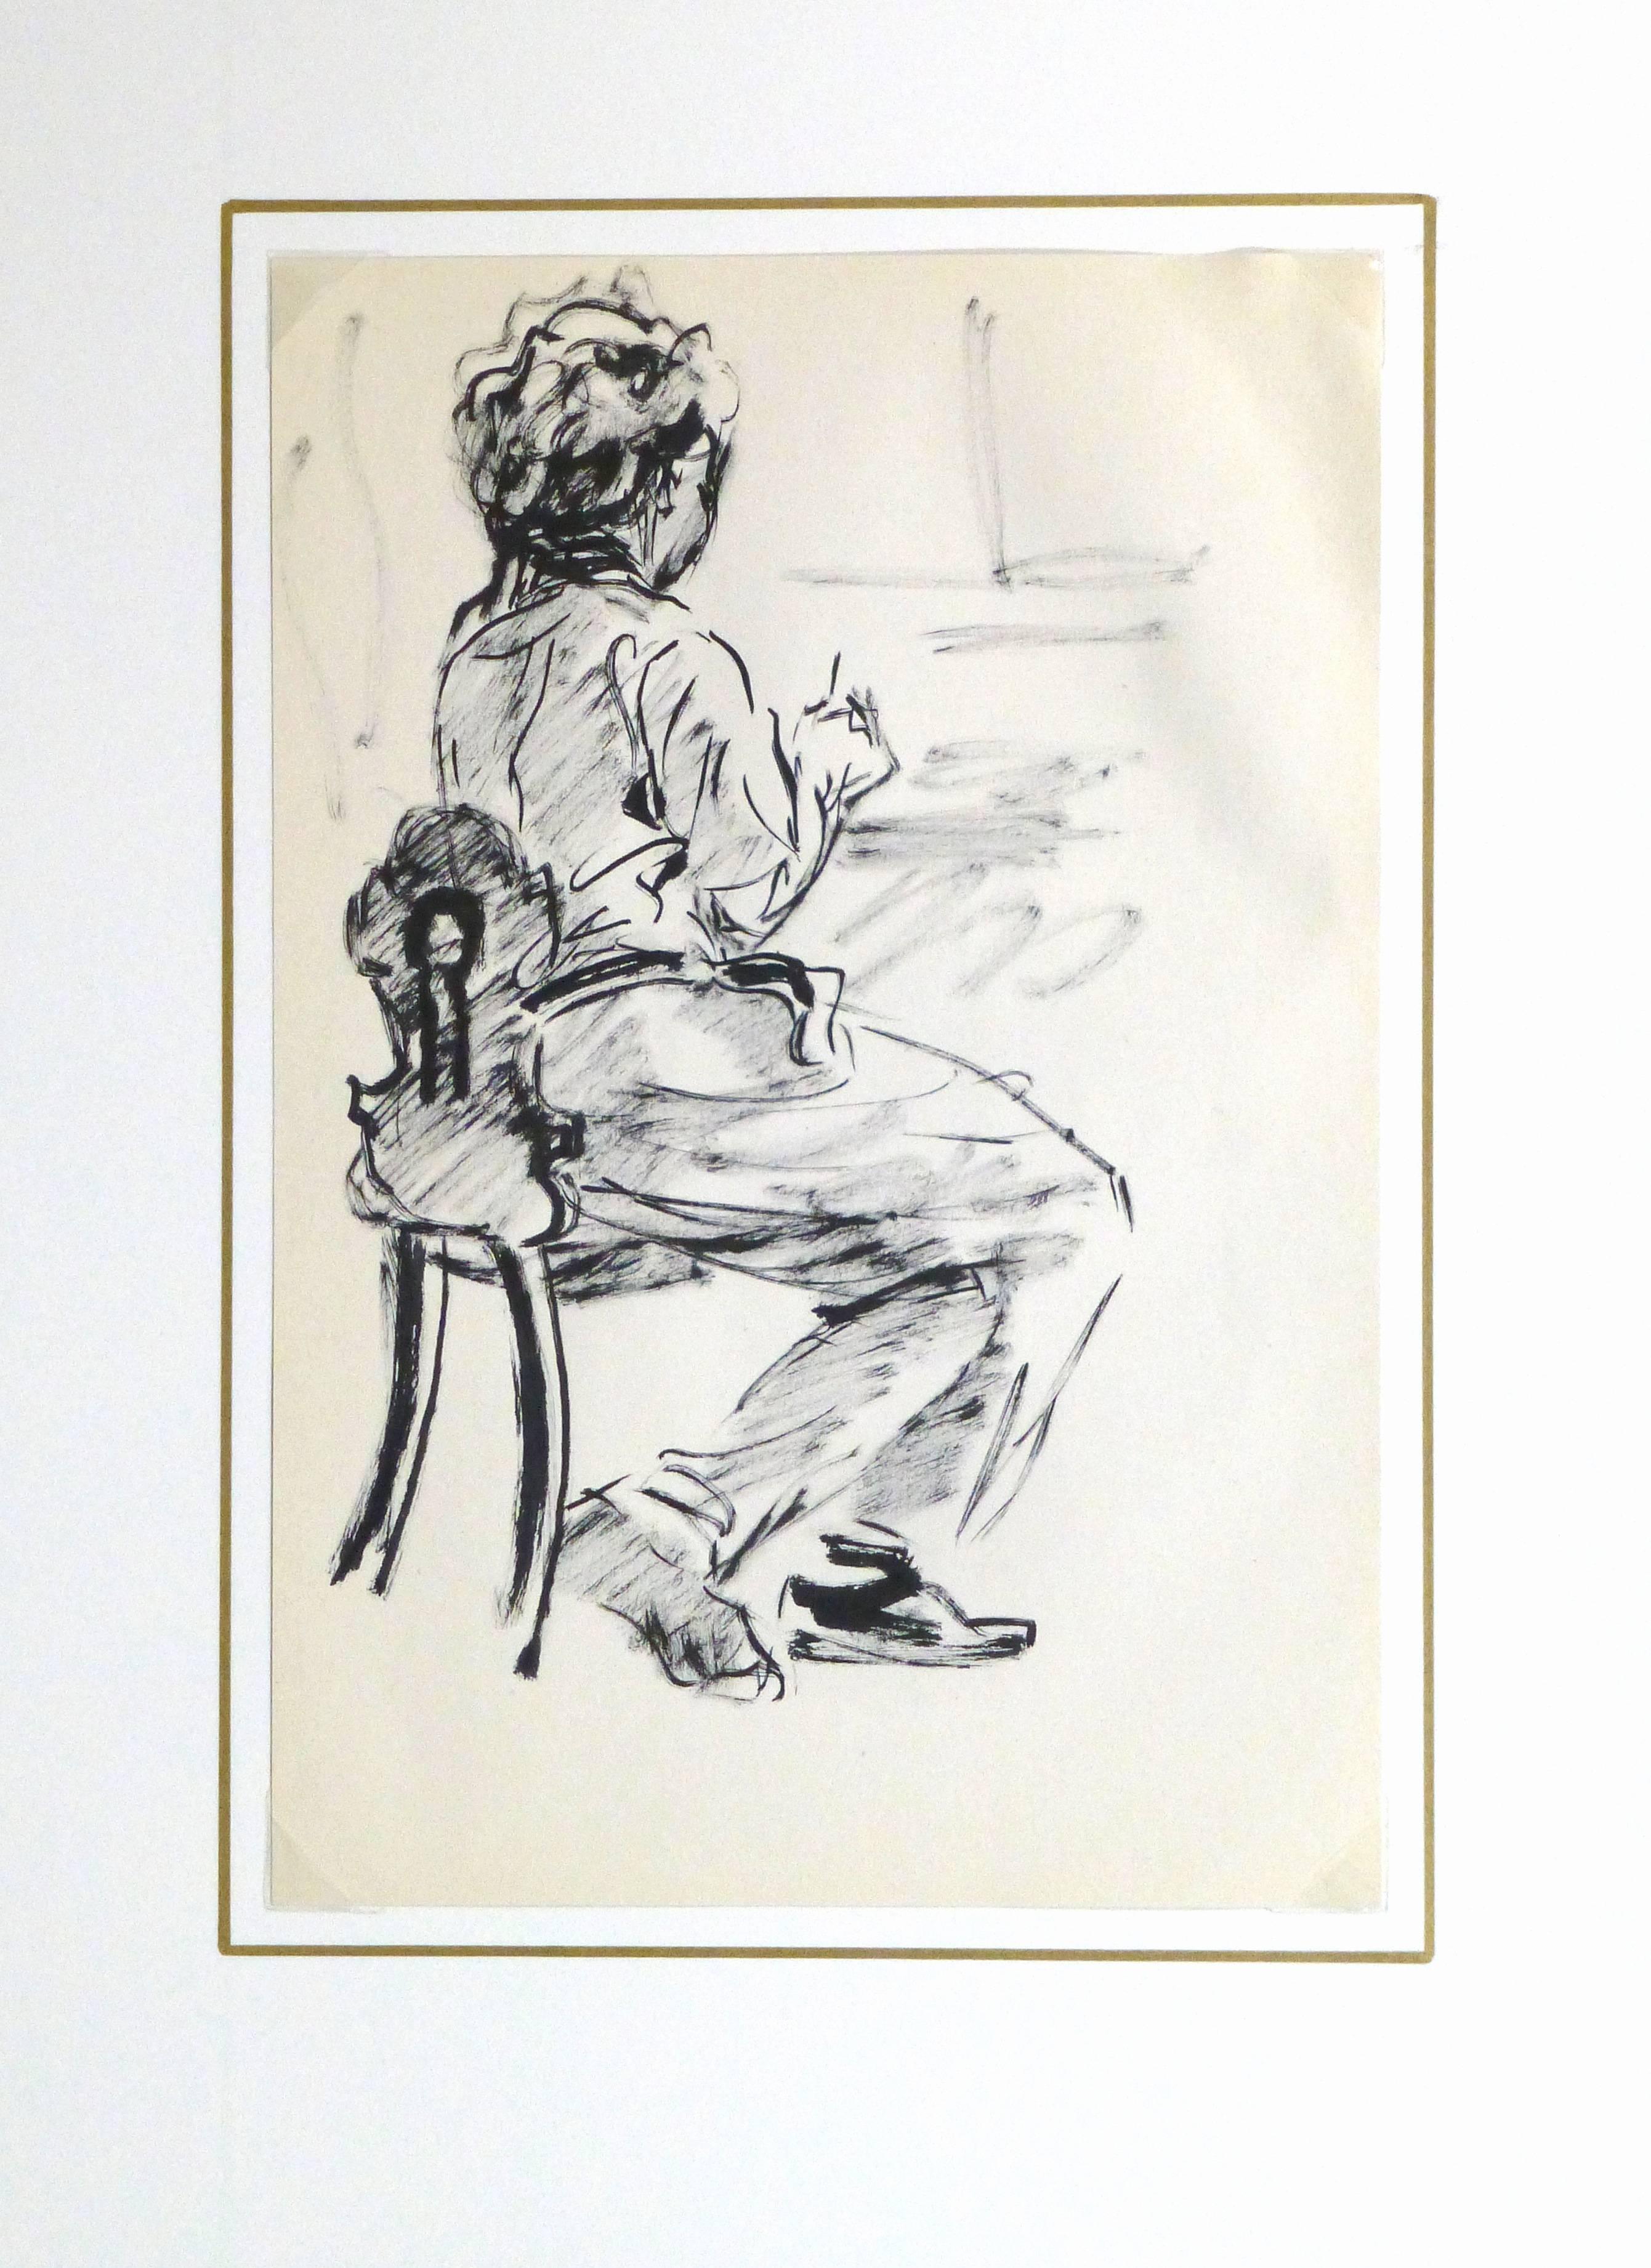 Black and white pen & ink drawing of an artist seated at their easel by French artist Jean-Baptiste Grancher, circa 1950. 

Original artwork on paper displayed on a white mat with a gold border. Archival plastic sleeve and Certificate of